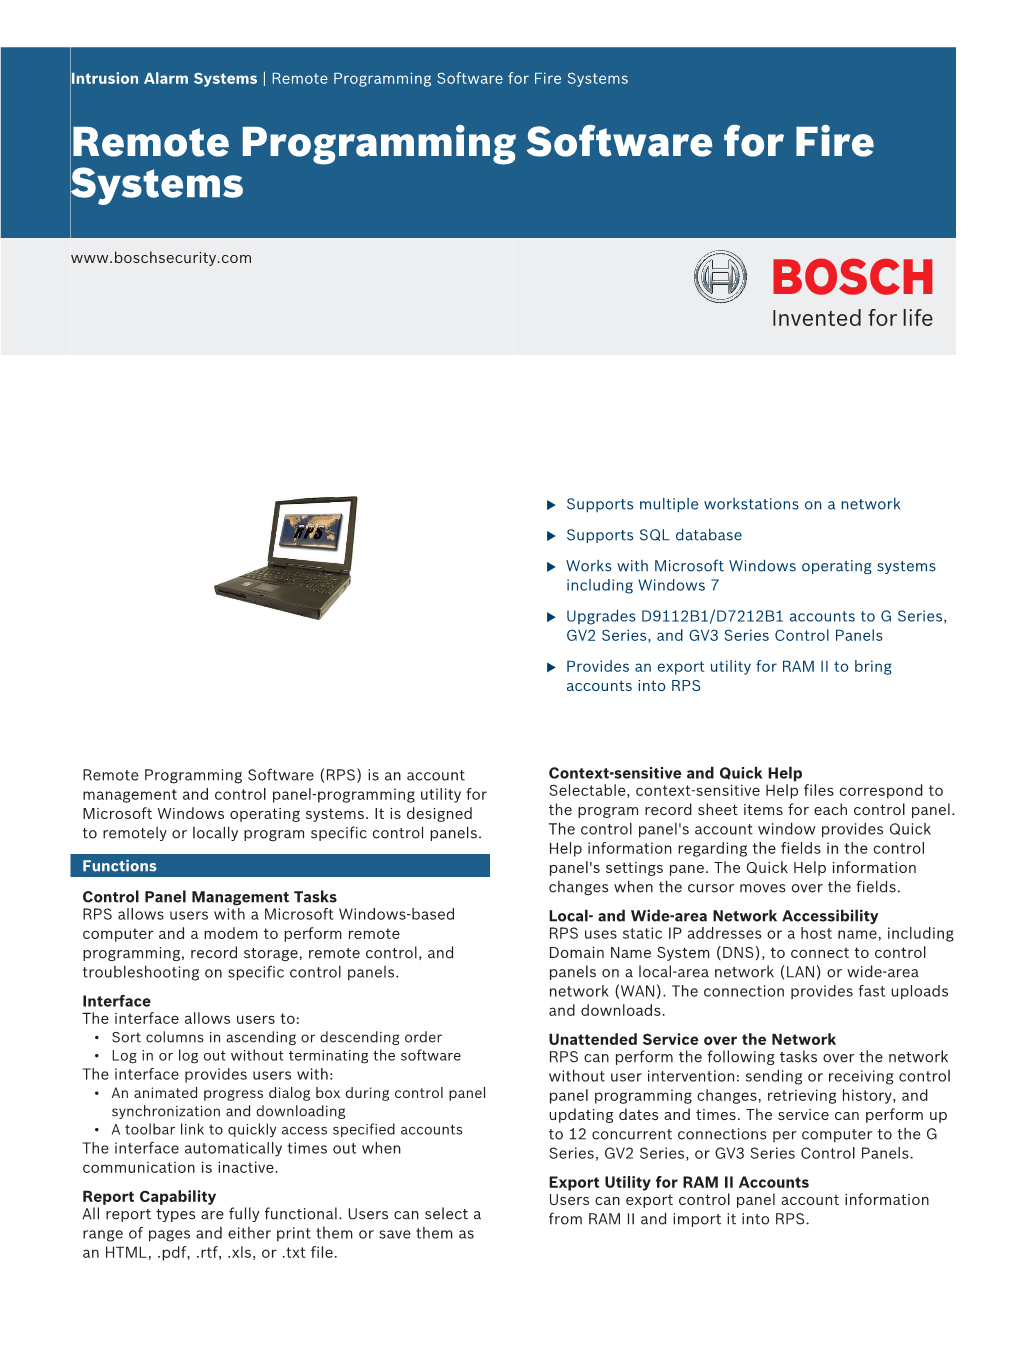 Remote Programming Software for Fire Systems Remote Programming Software for Fire Systems